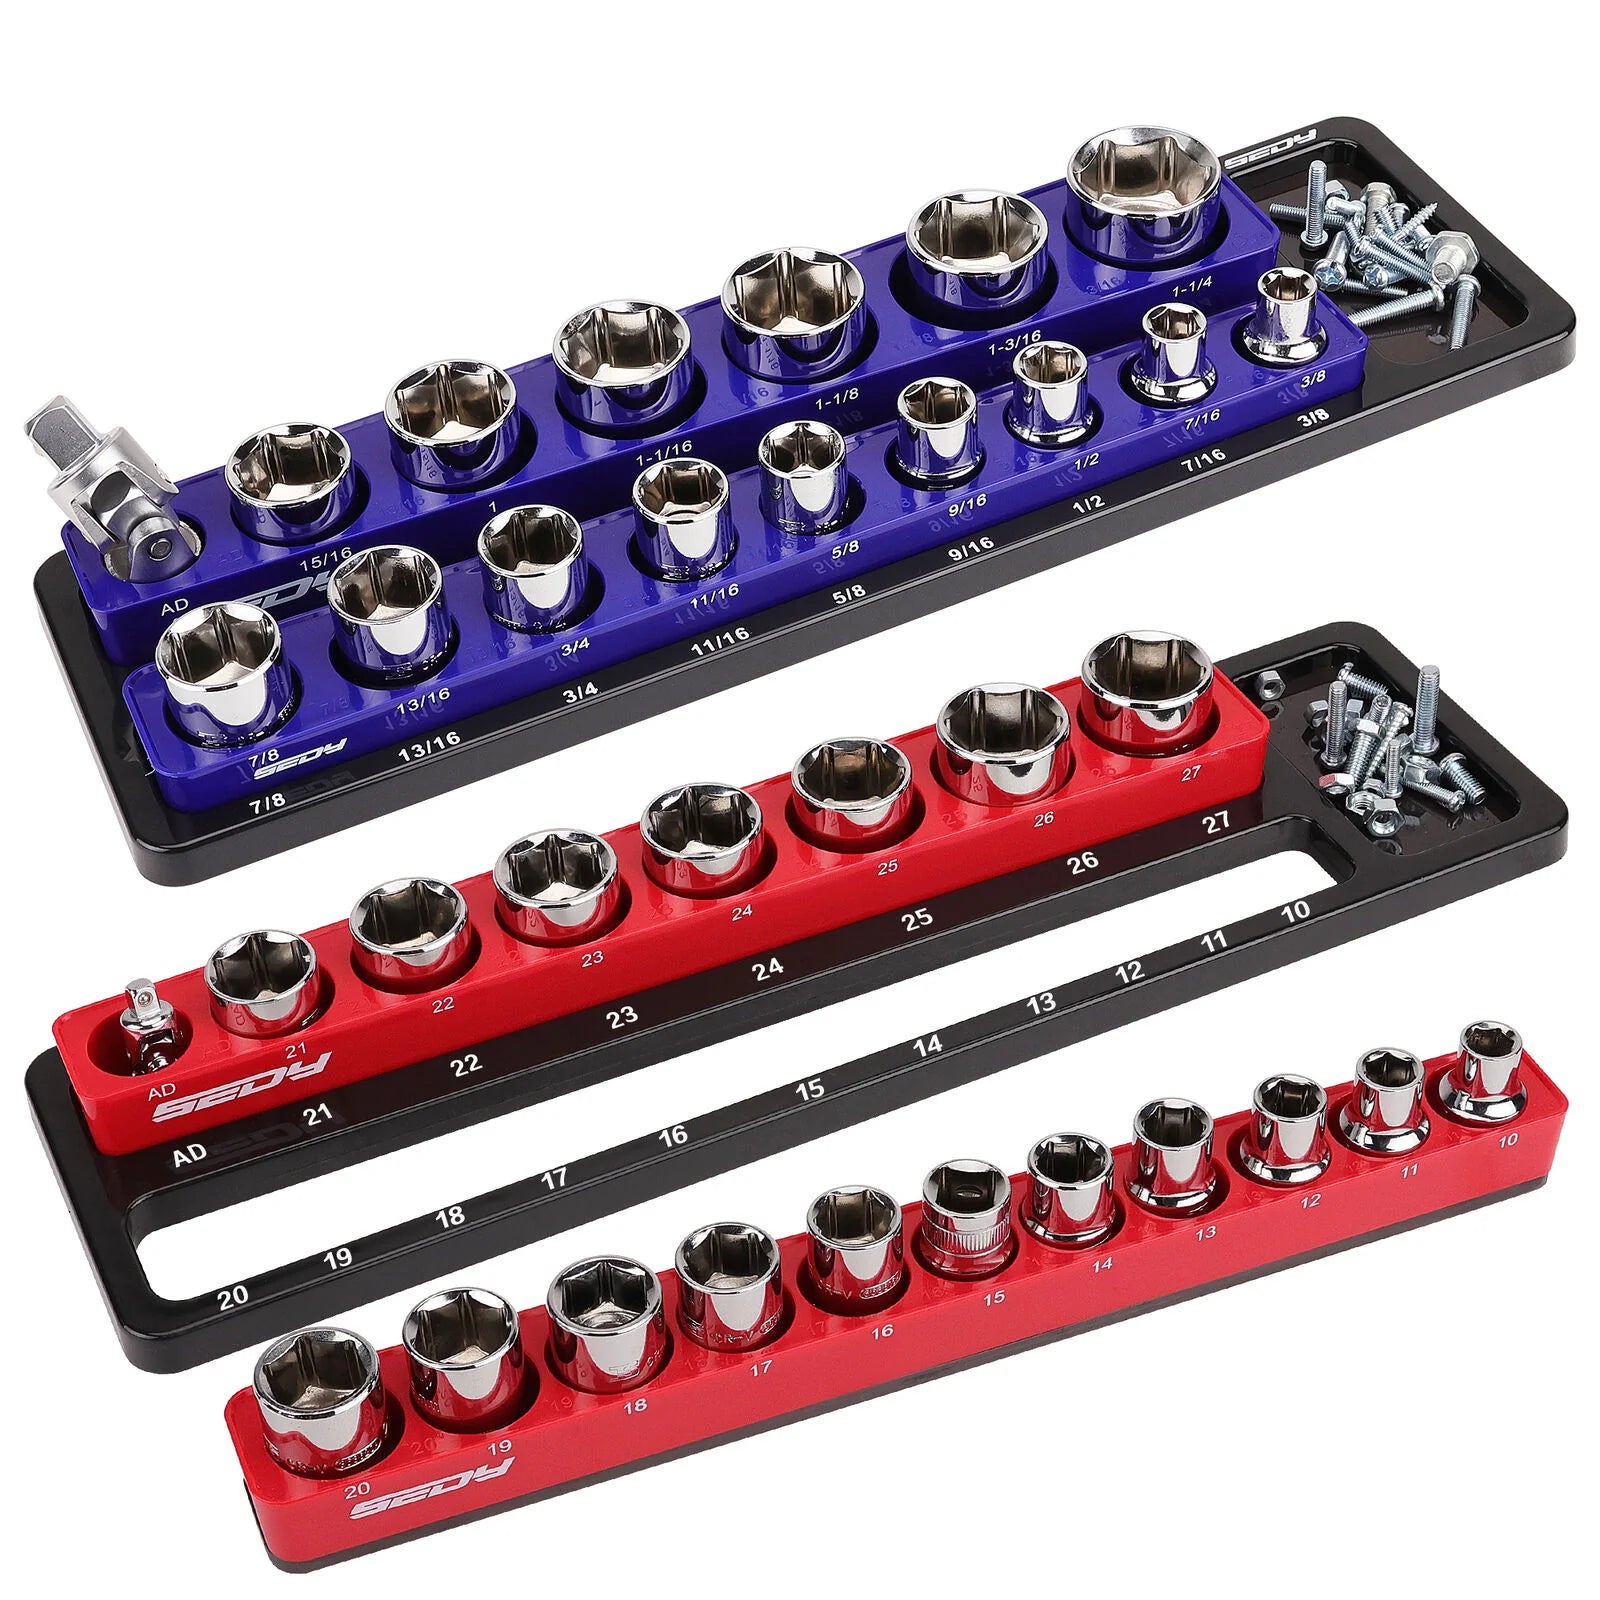 2Pc Magnetic Socket Organizer 1/2" Drive Metric SAE Sockets Storage Holder 35 Slots - South East Clearance Centre